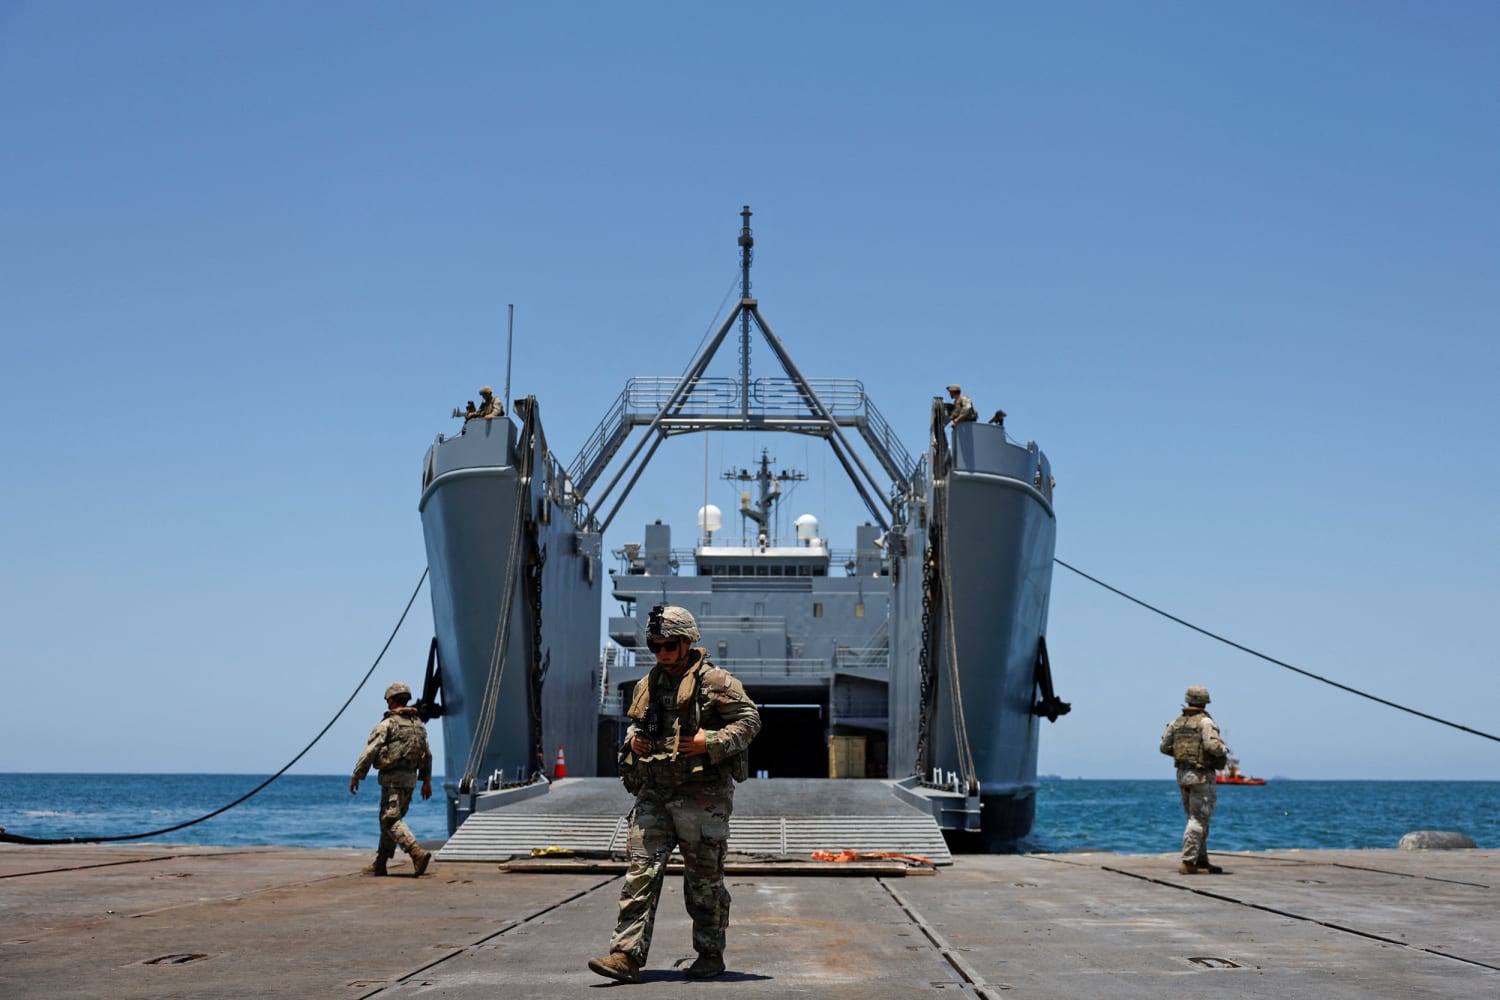 Journalists get a rare glimpse into the US military’s troubled dock system in Gaza